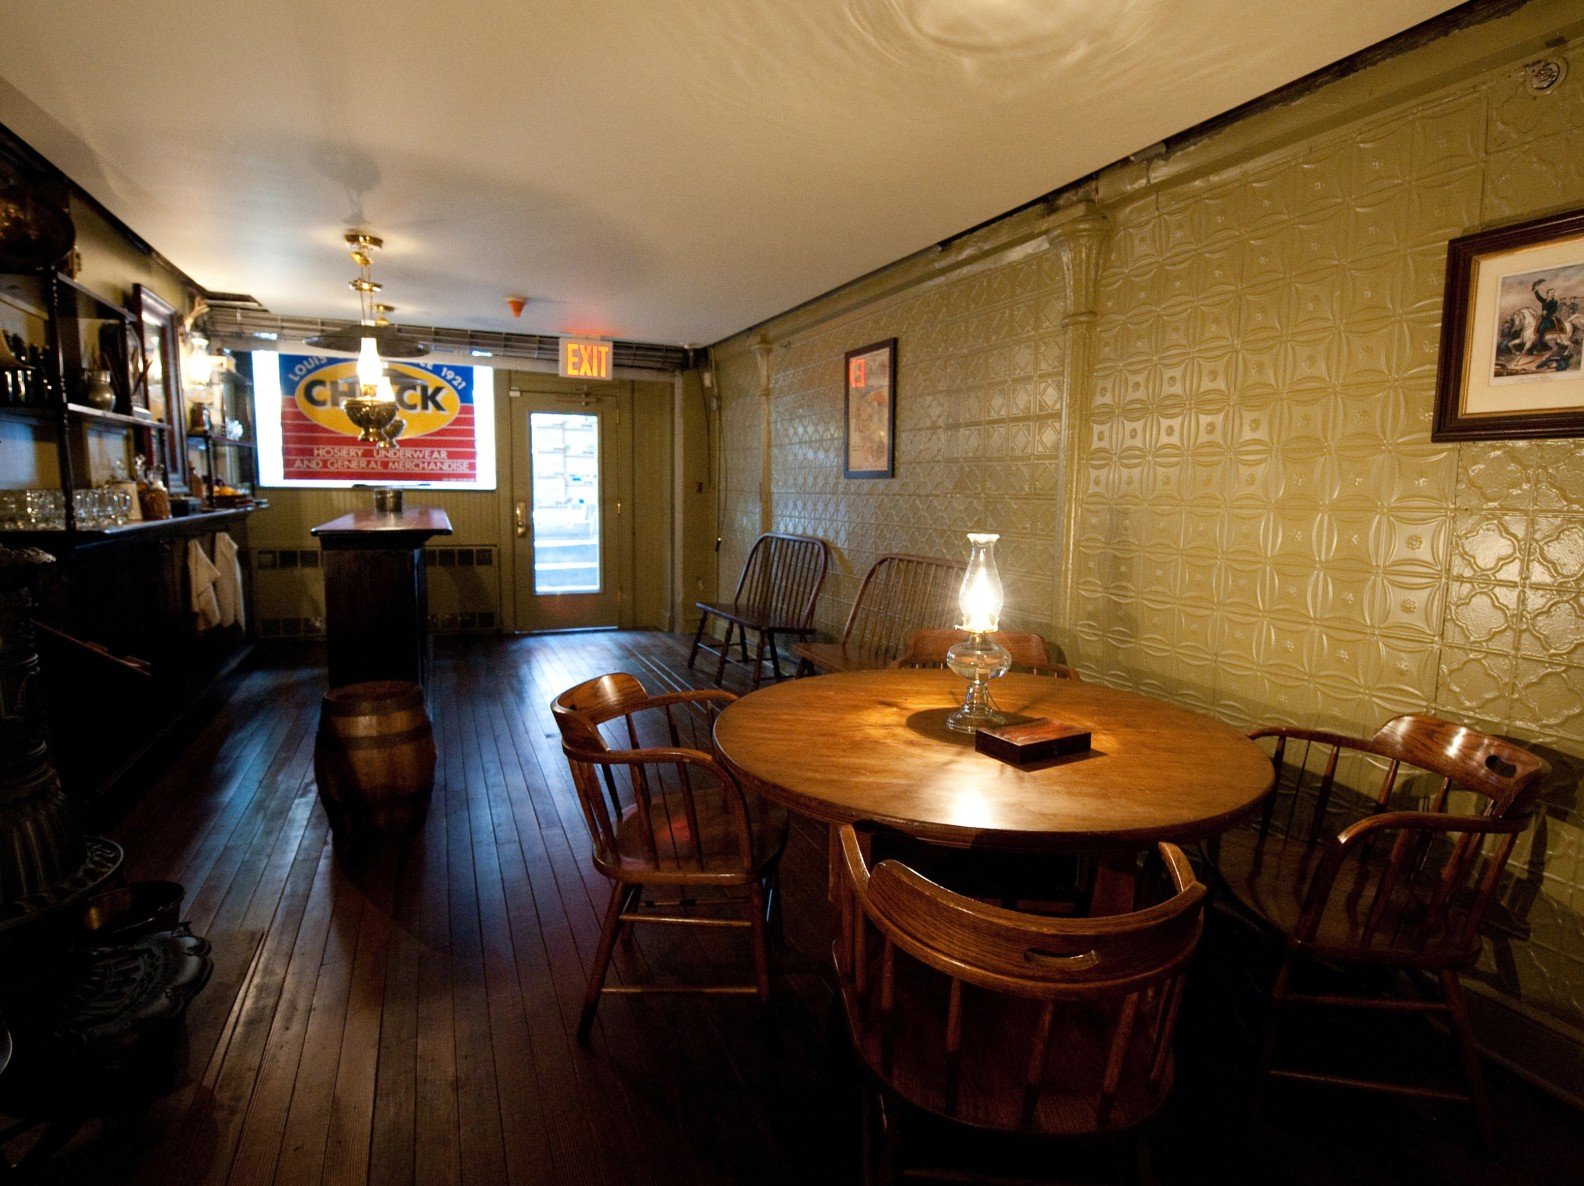 Schneider saloon at a different angle showing a lamp on a table with 4 seats and a decorative tile-patterned wall behind it